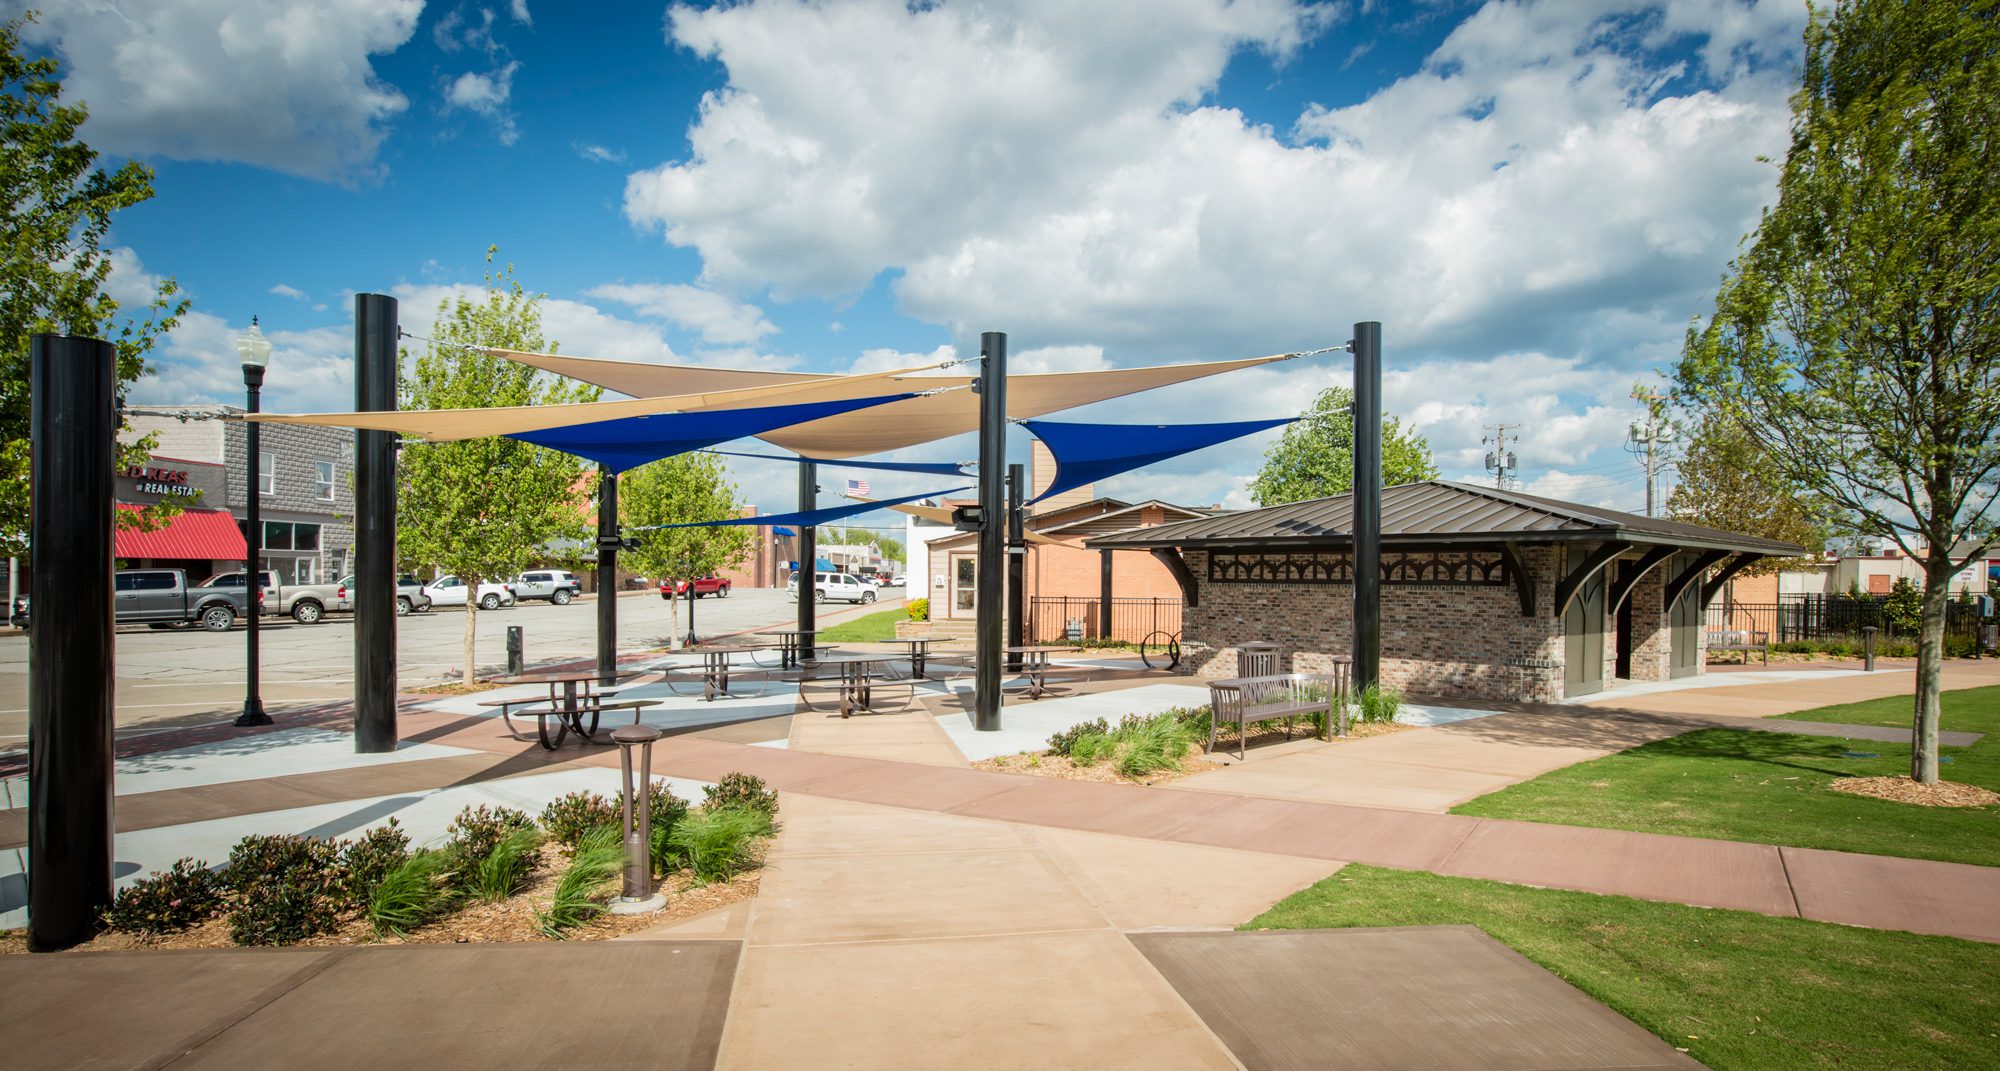 A park with benches and picnic tables under shade sails.